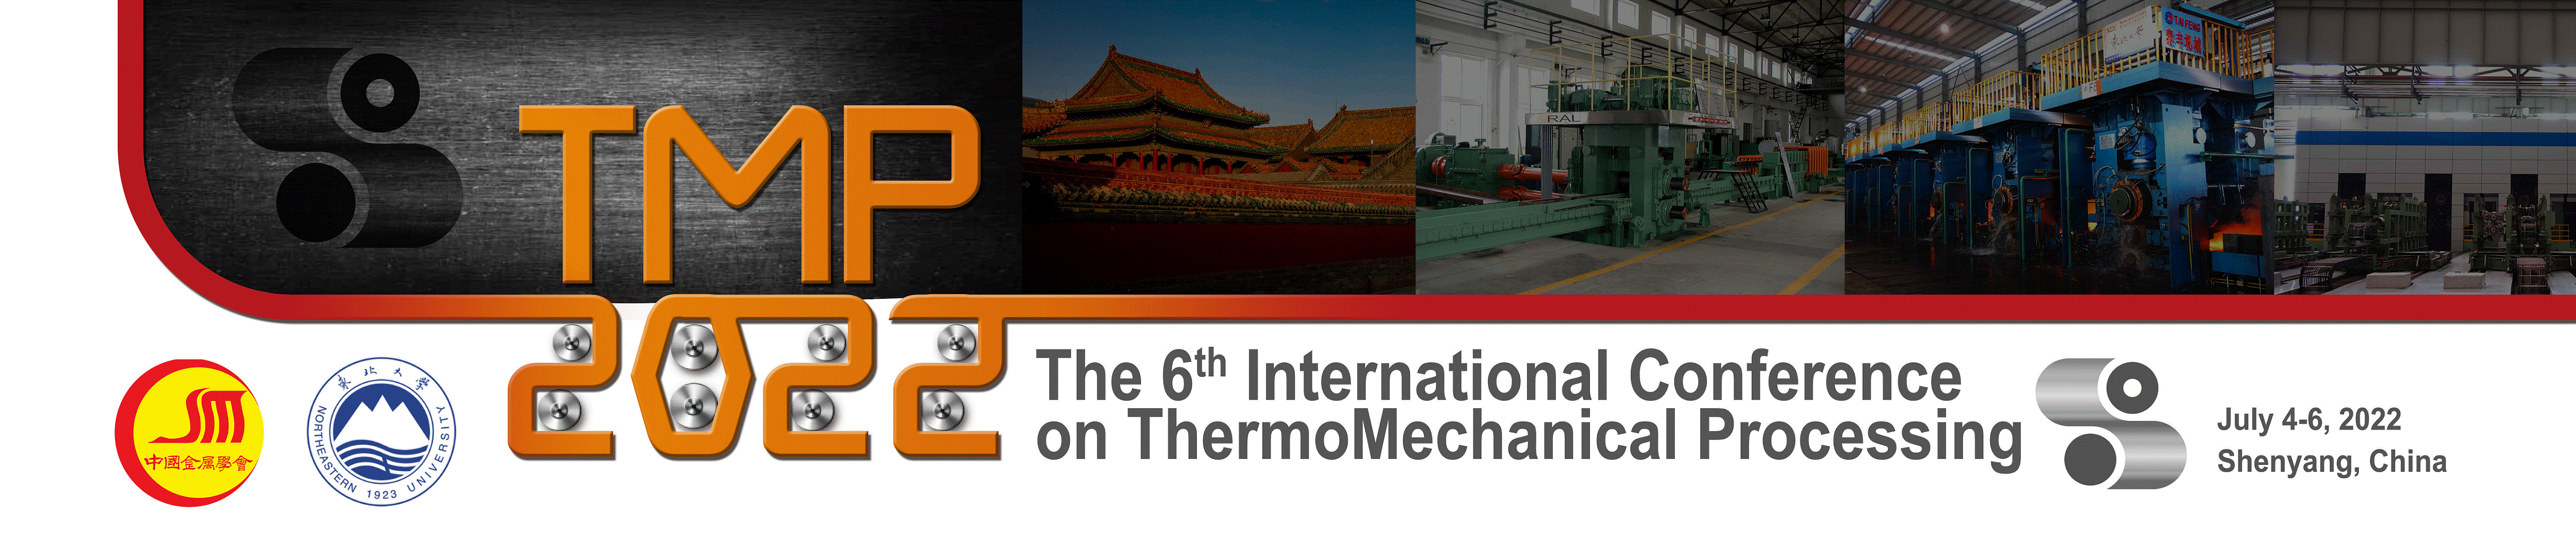 6th International Conference on ThermoMechanical Processing (TMP2022)